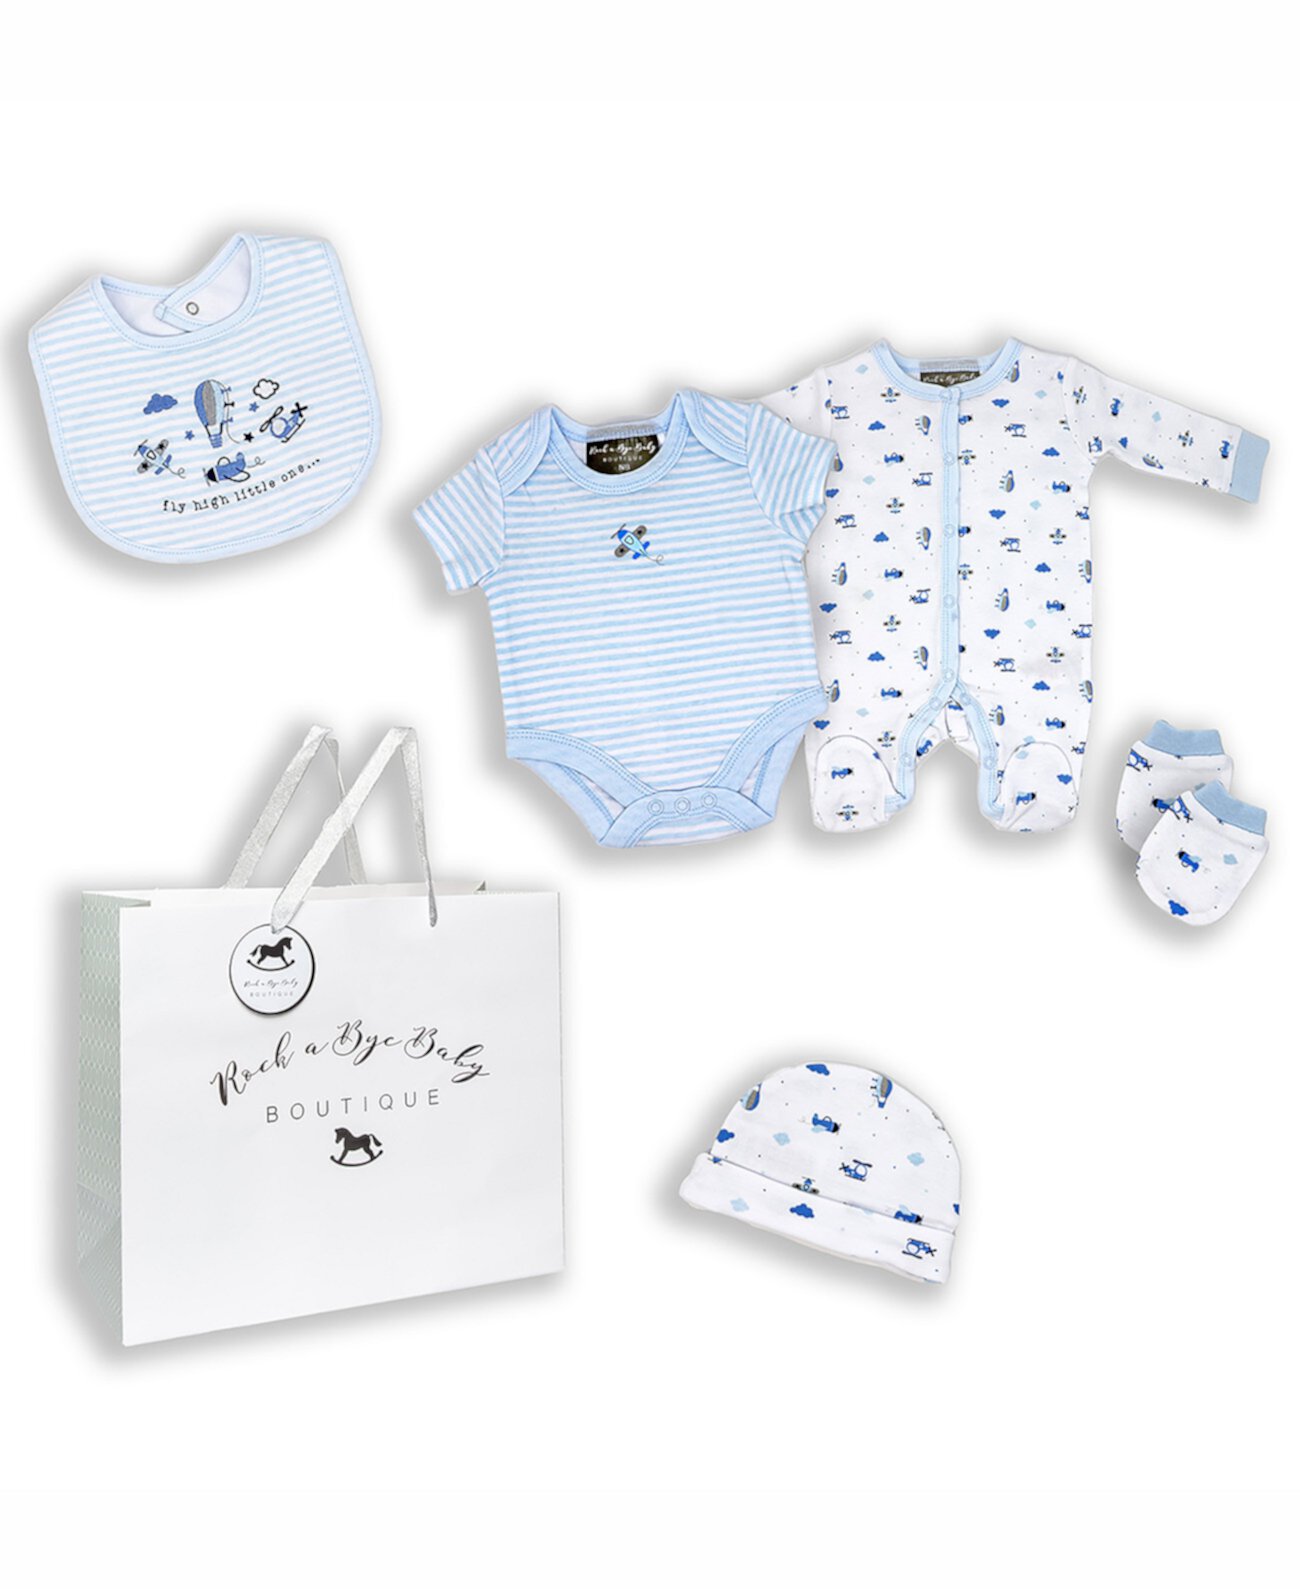 Baby Boys Fly High Layette Gift в сетчатом мешке, набор из 5 предметов Rock-A-Bye Baby Boutique